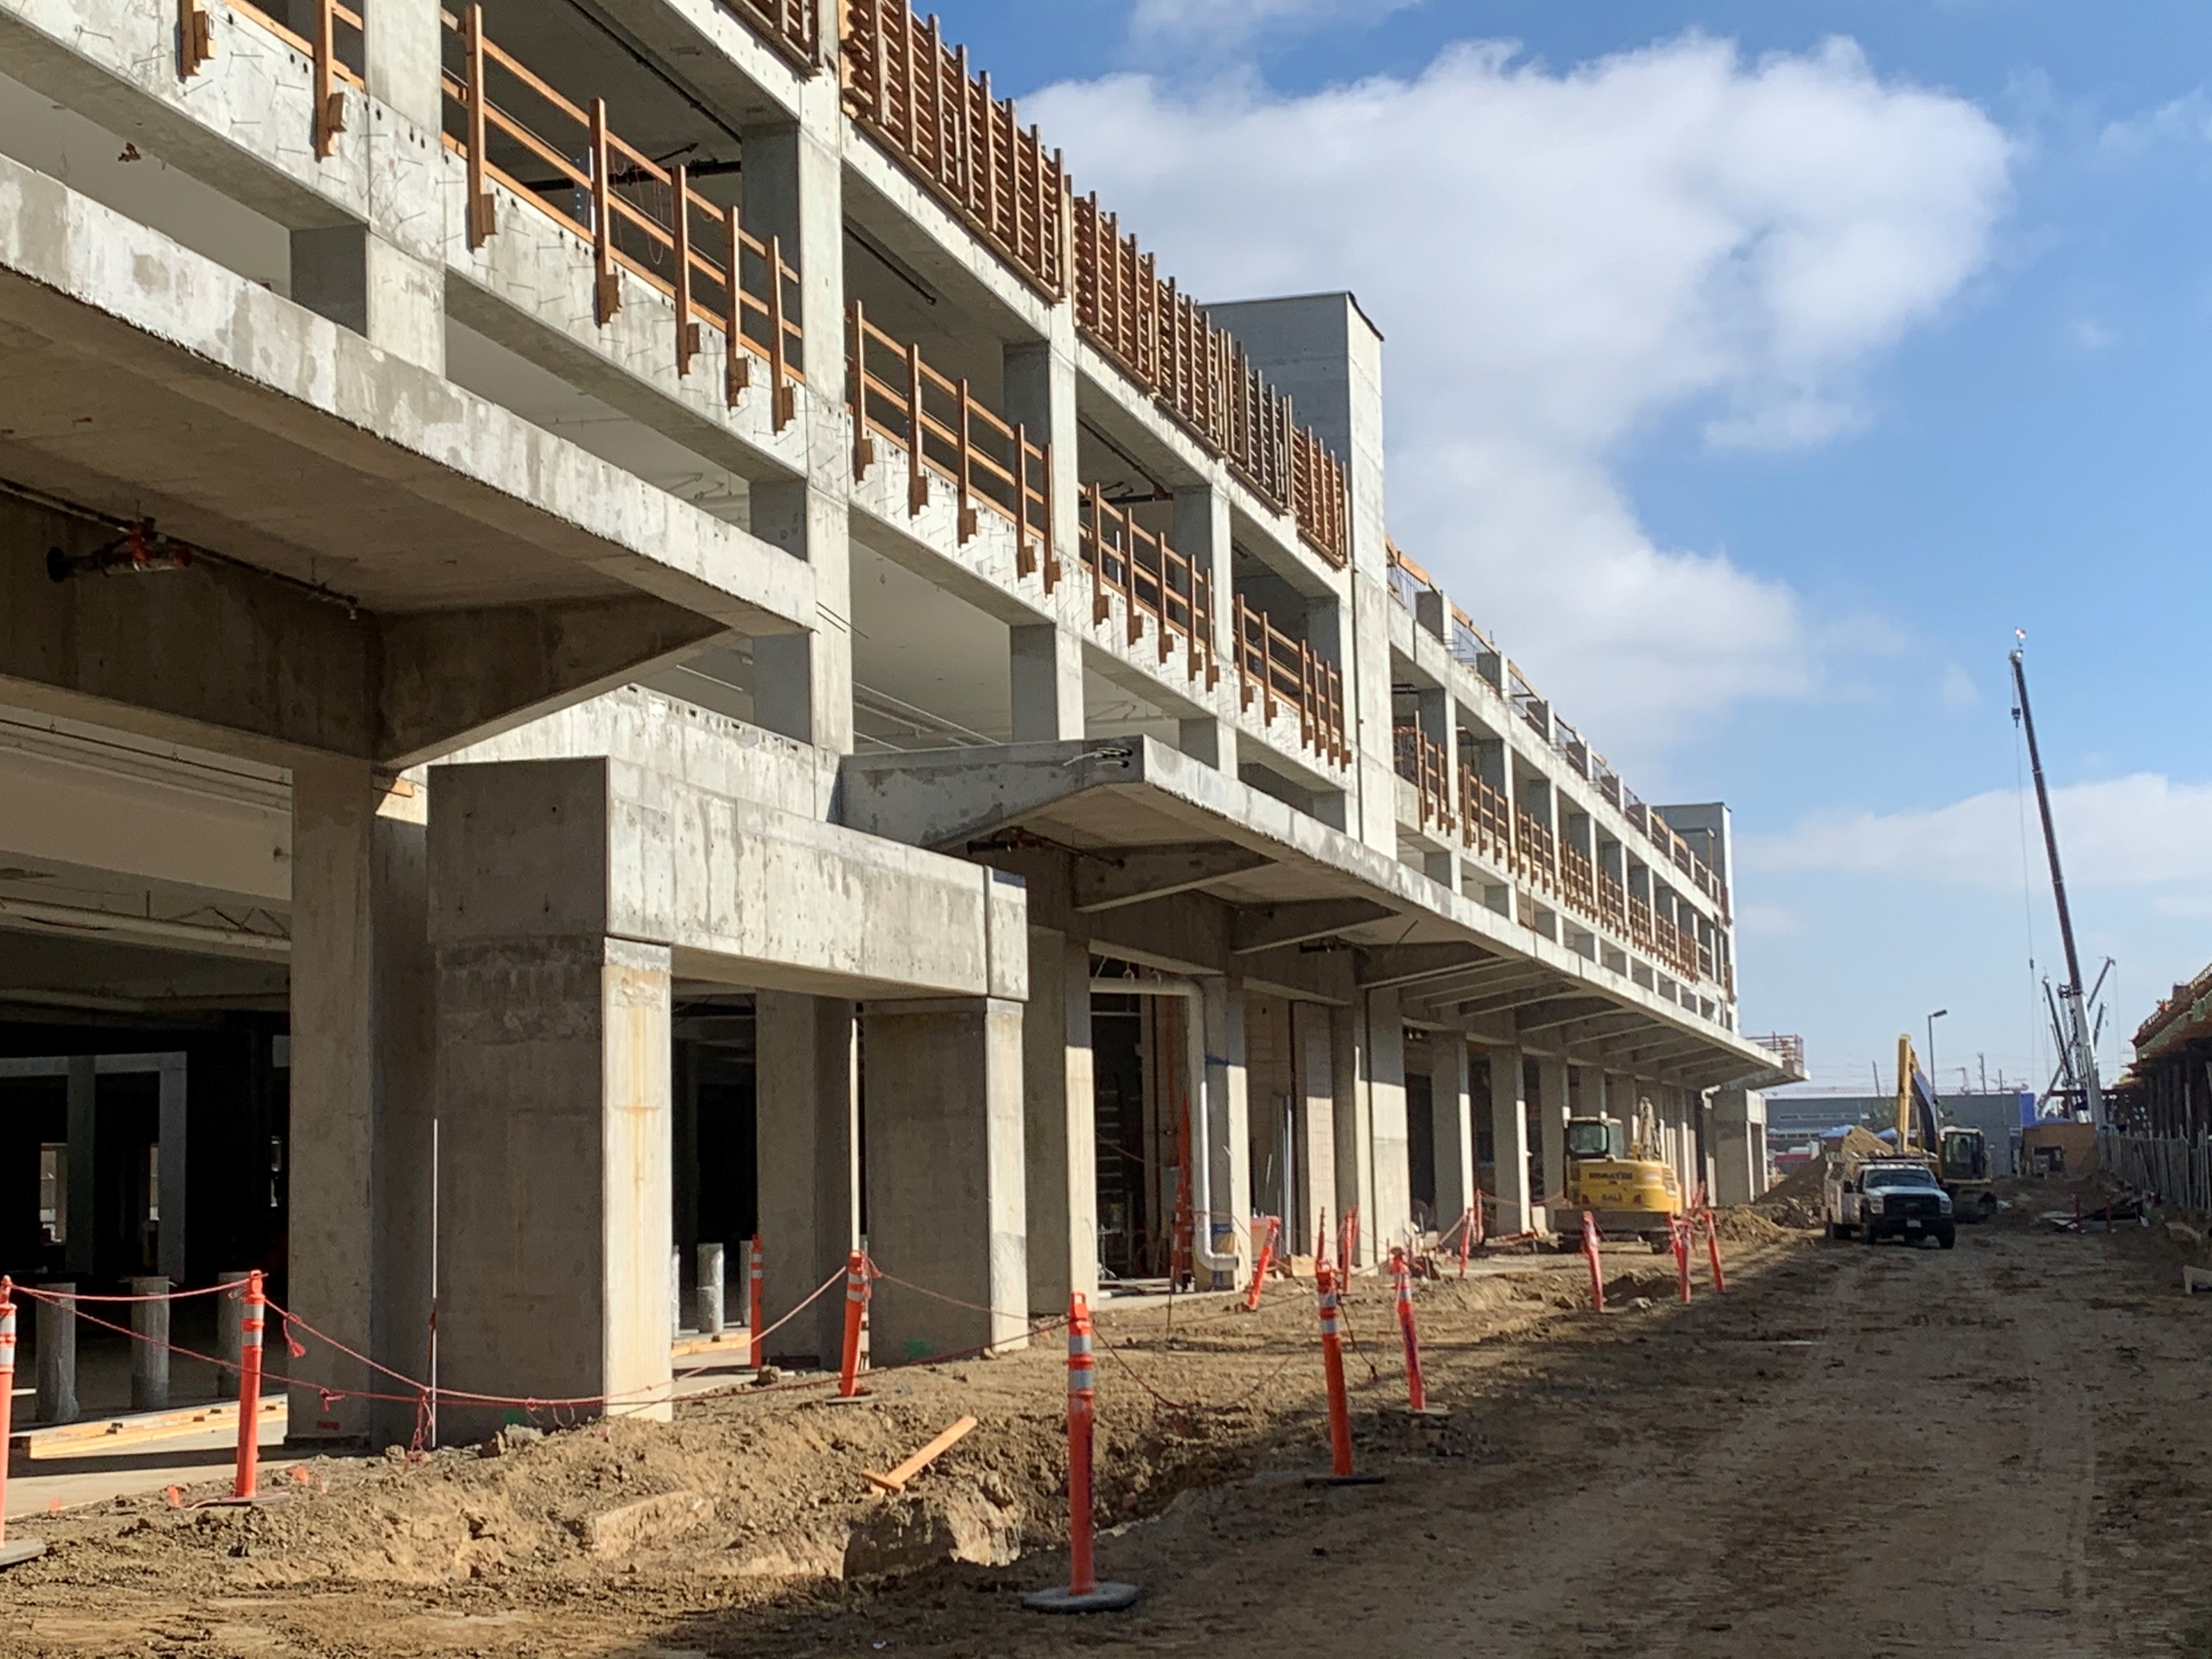 A view of the cantilever walkway on the south side of the Intermodal Transportation Facility-West, which will connect to the pedestrian bridge for the Automated People Mover station in the future.